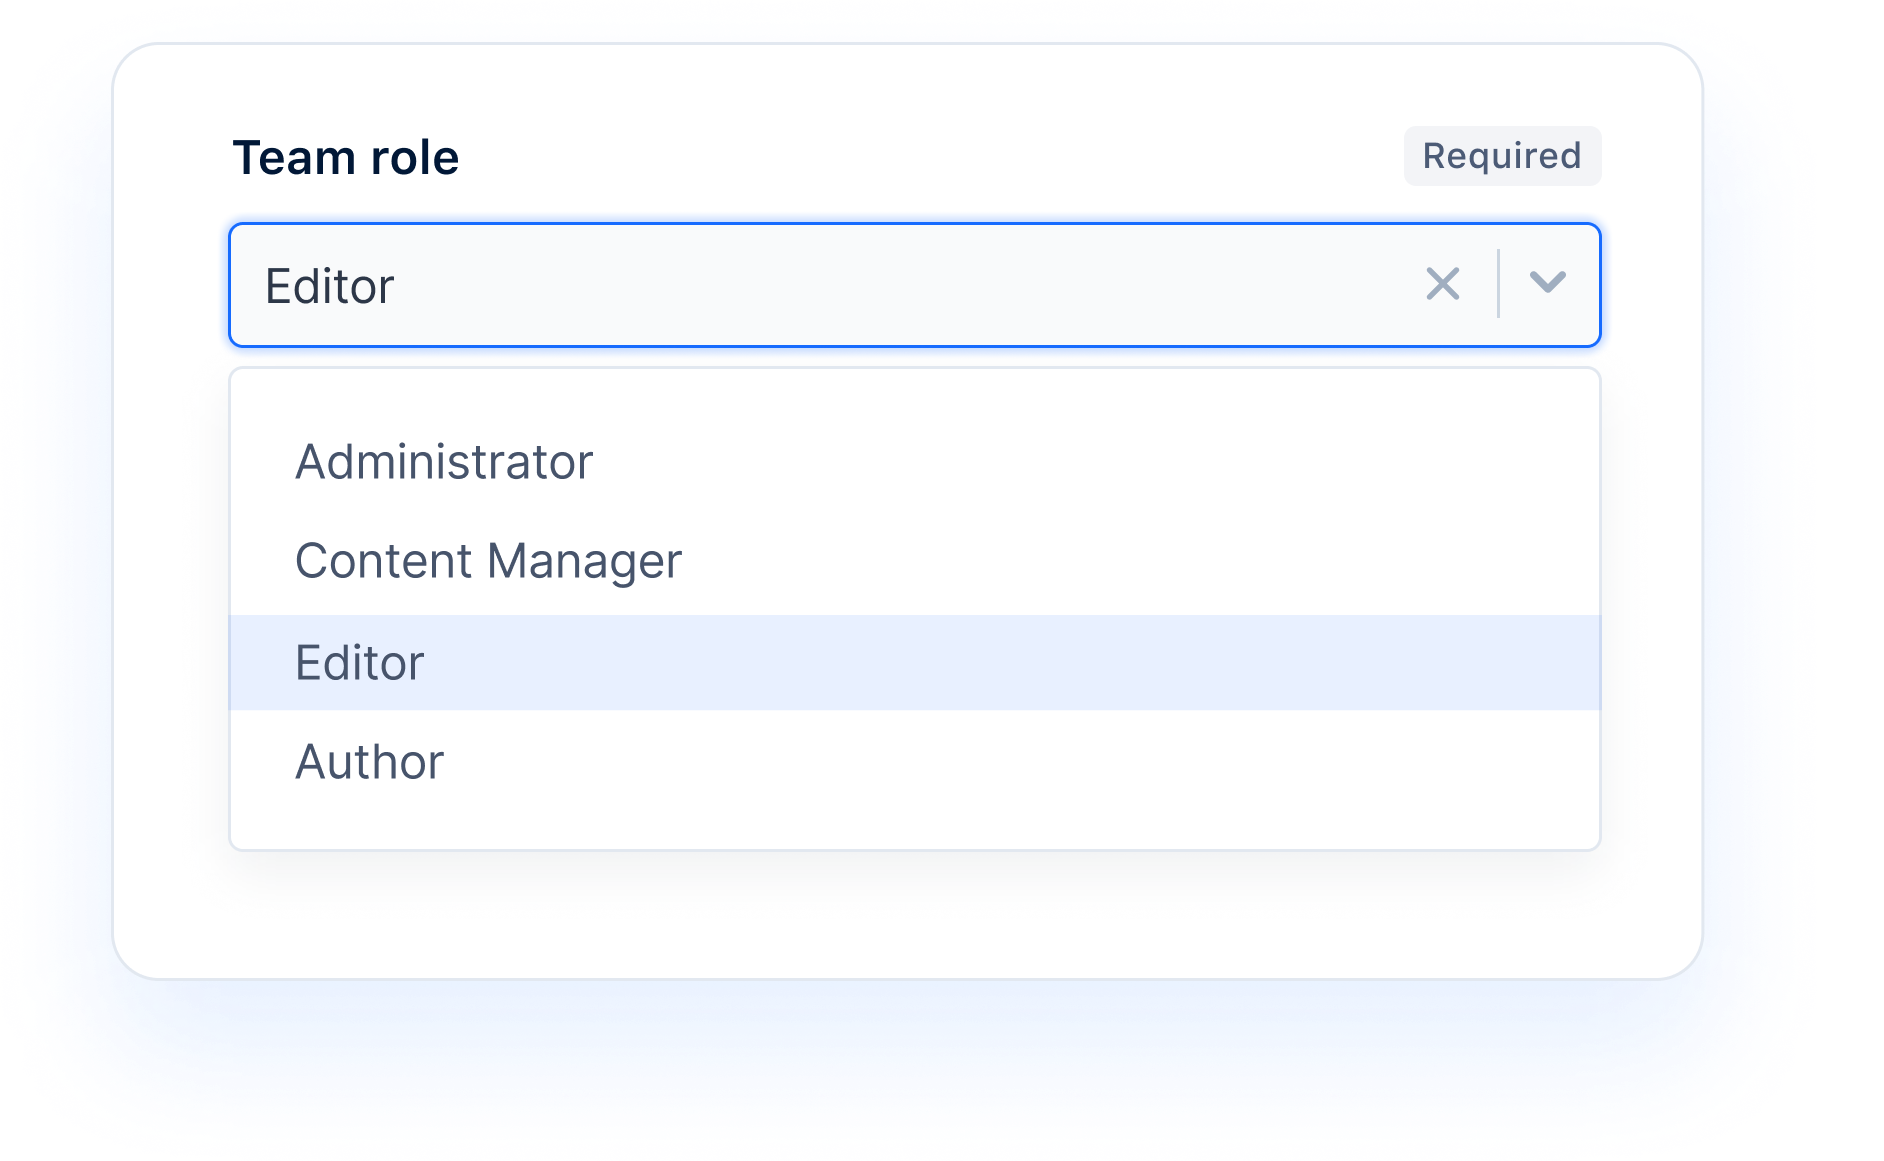 Dropdown selector from Keystone’s Admin UI showing different user roles: Administrator, Editor, Content Manager, Author